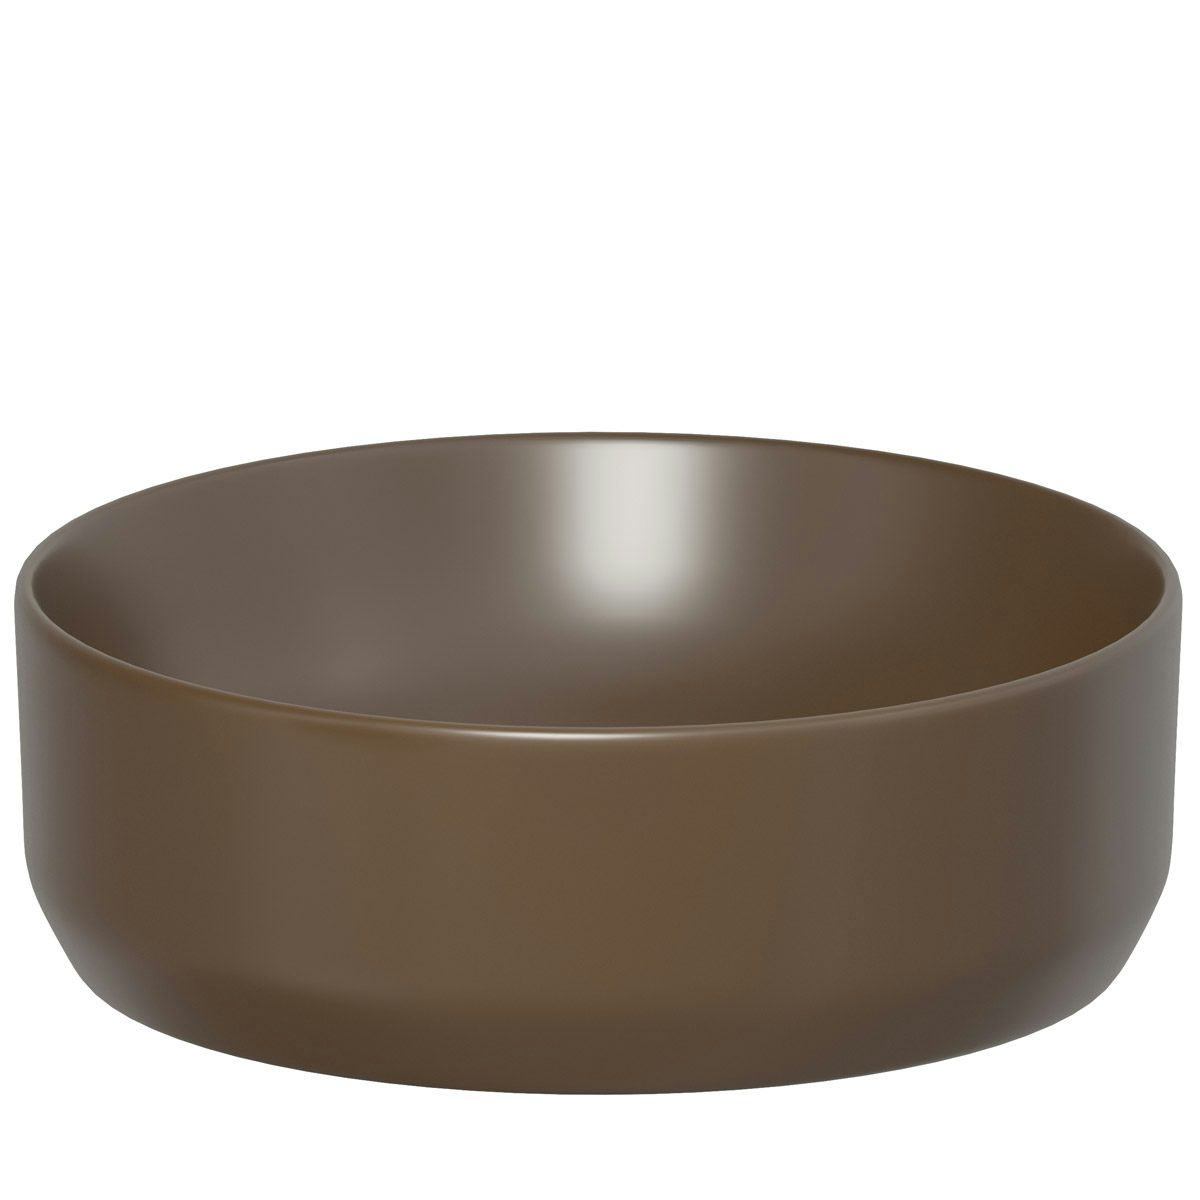 Mode Orion brown coloured countertop basin 355mm